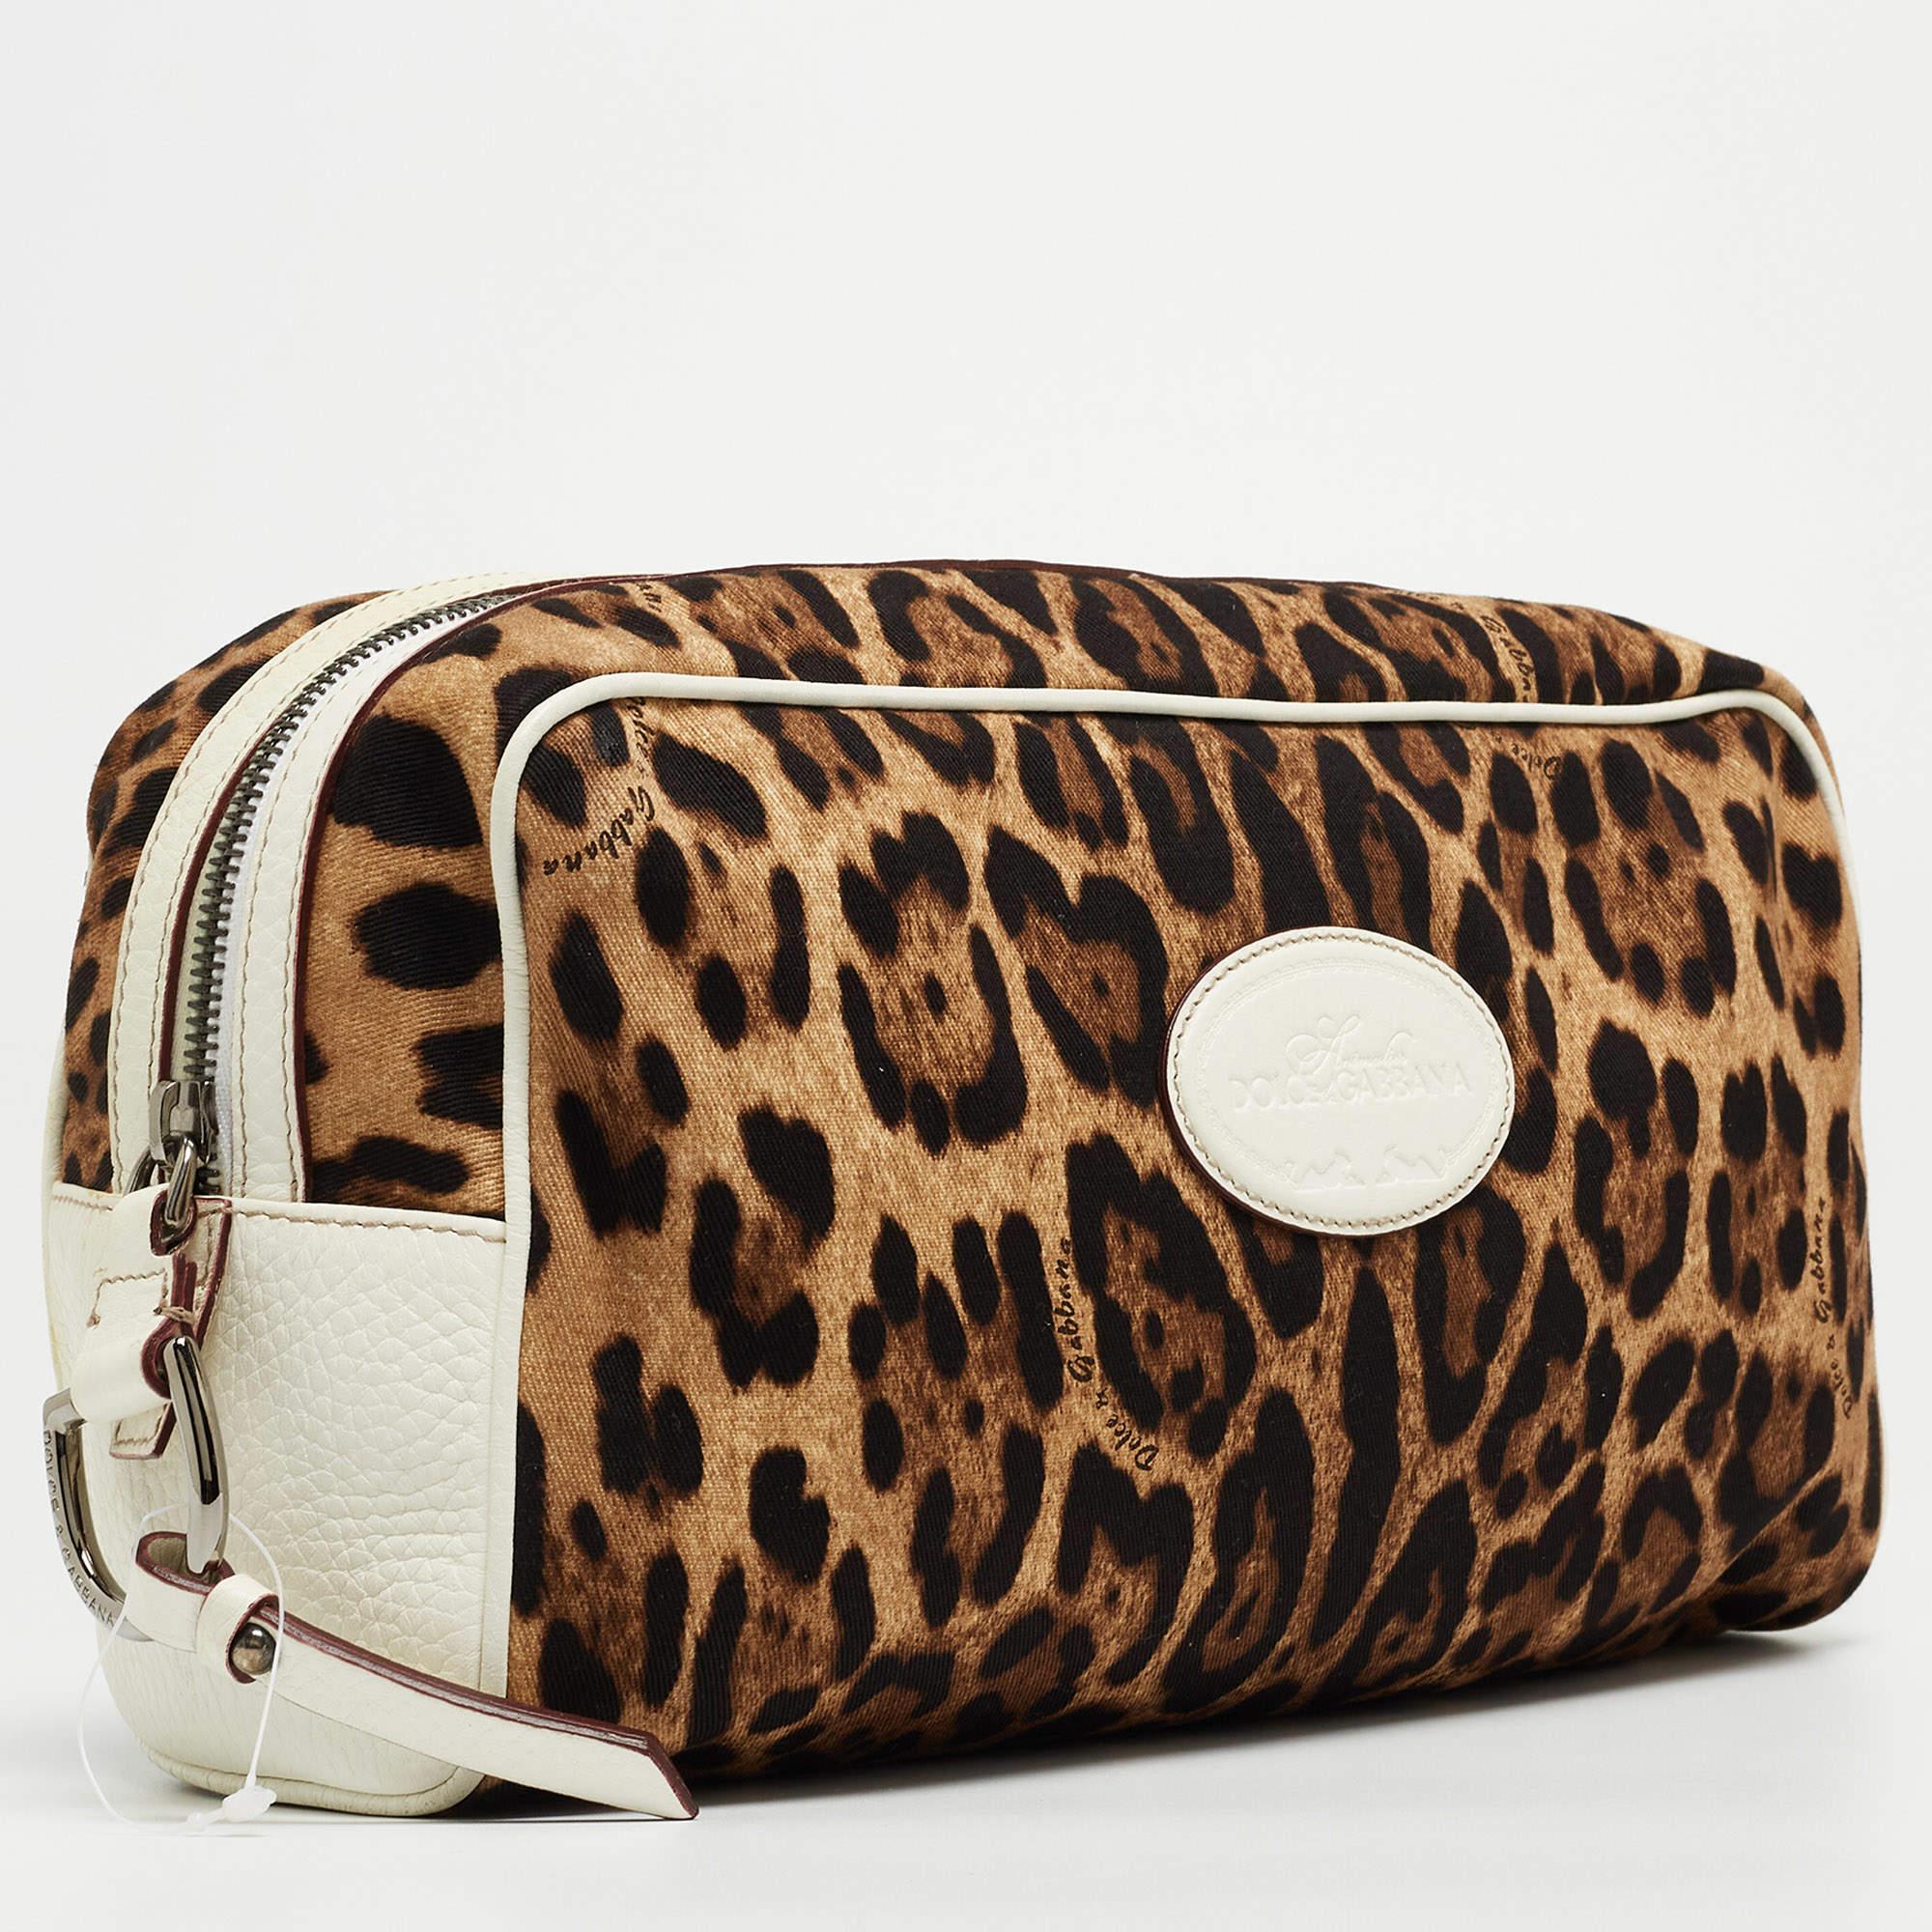 Crafted from leopard print fabric & leather, the Dolce & Gabbana cosmetic pouch is designed to be a handy, durable accessory. The pouch has a zip-enclosed compartment and a brand accent on the front. It will easily fit into your luggage bags and